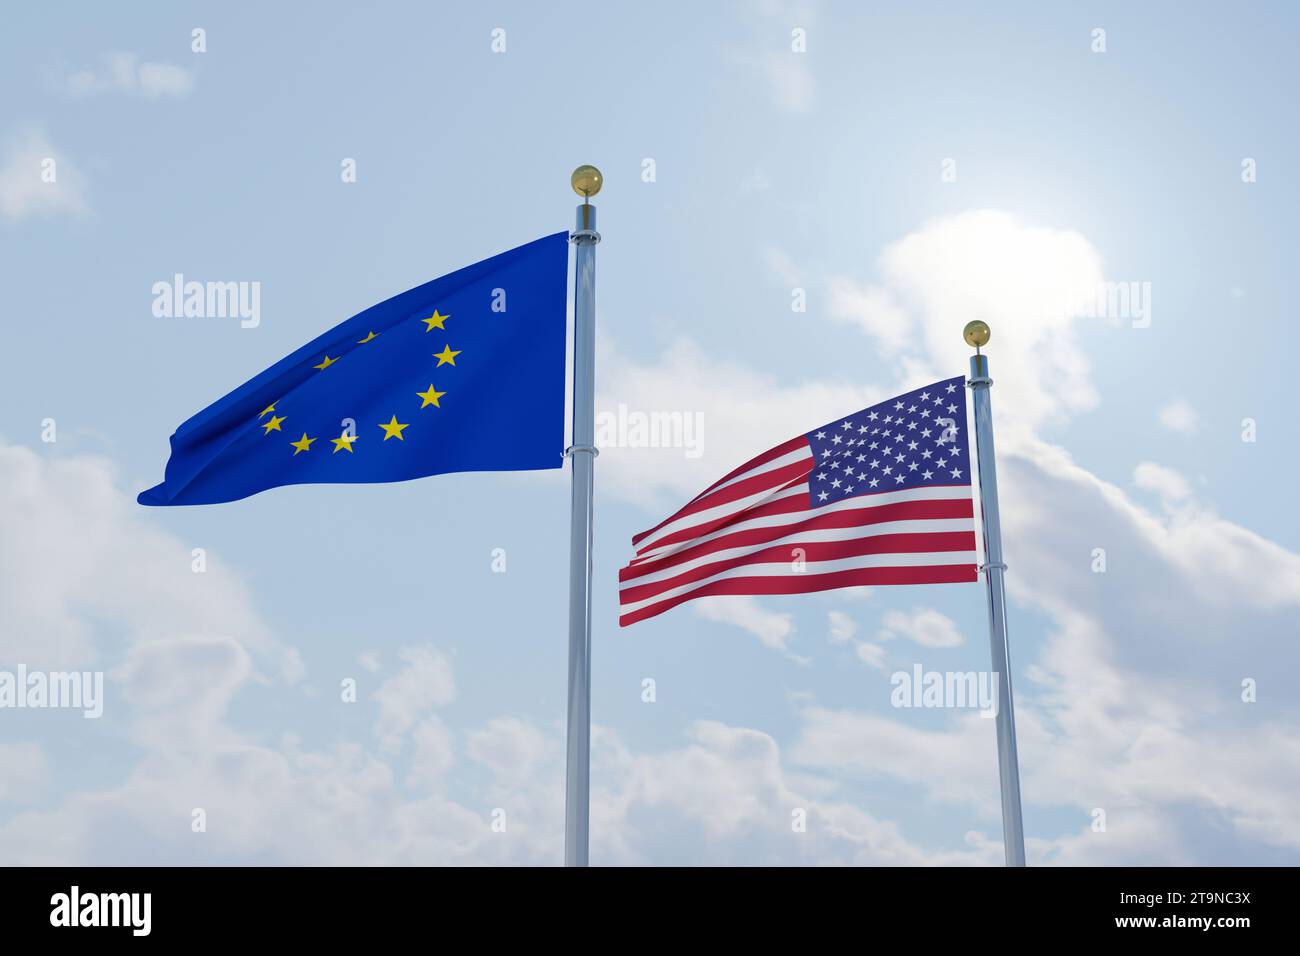 The flag of the European Union with the flag of the United States of America, commercial and political relations between Europe and America Stock Photo